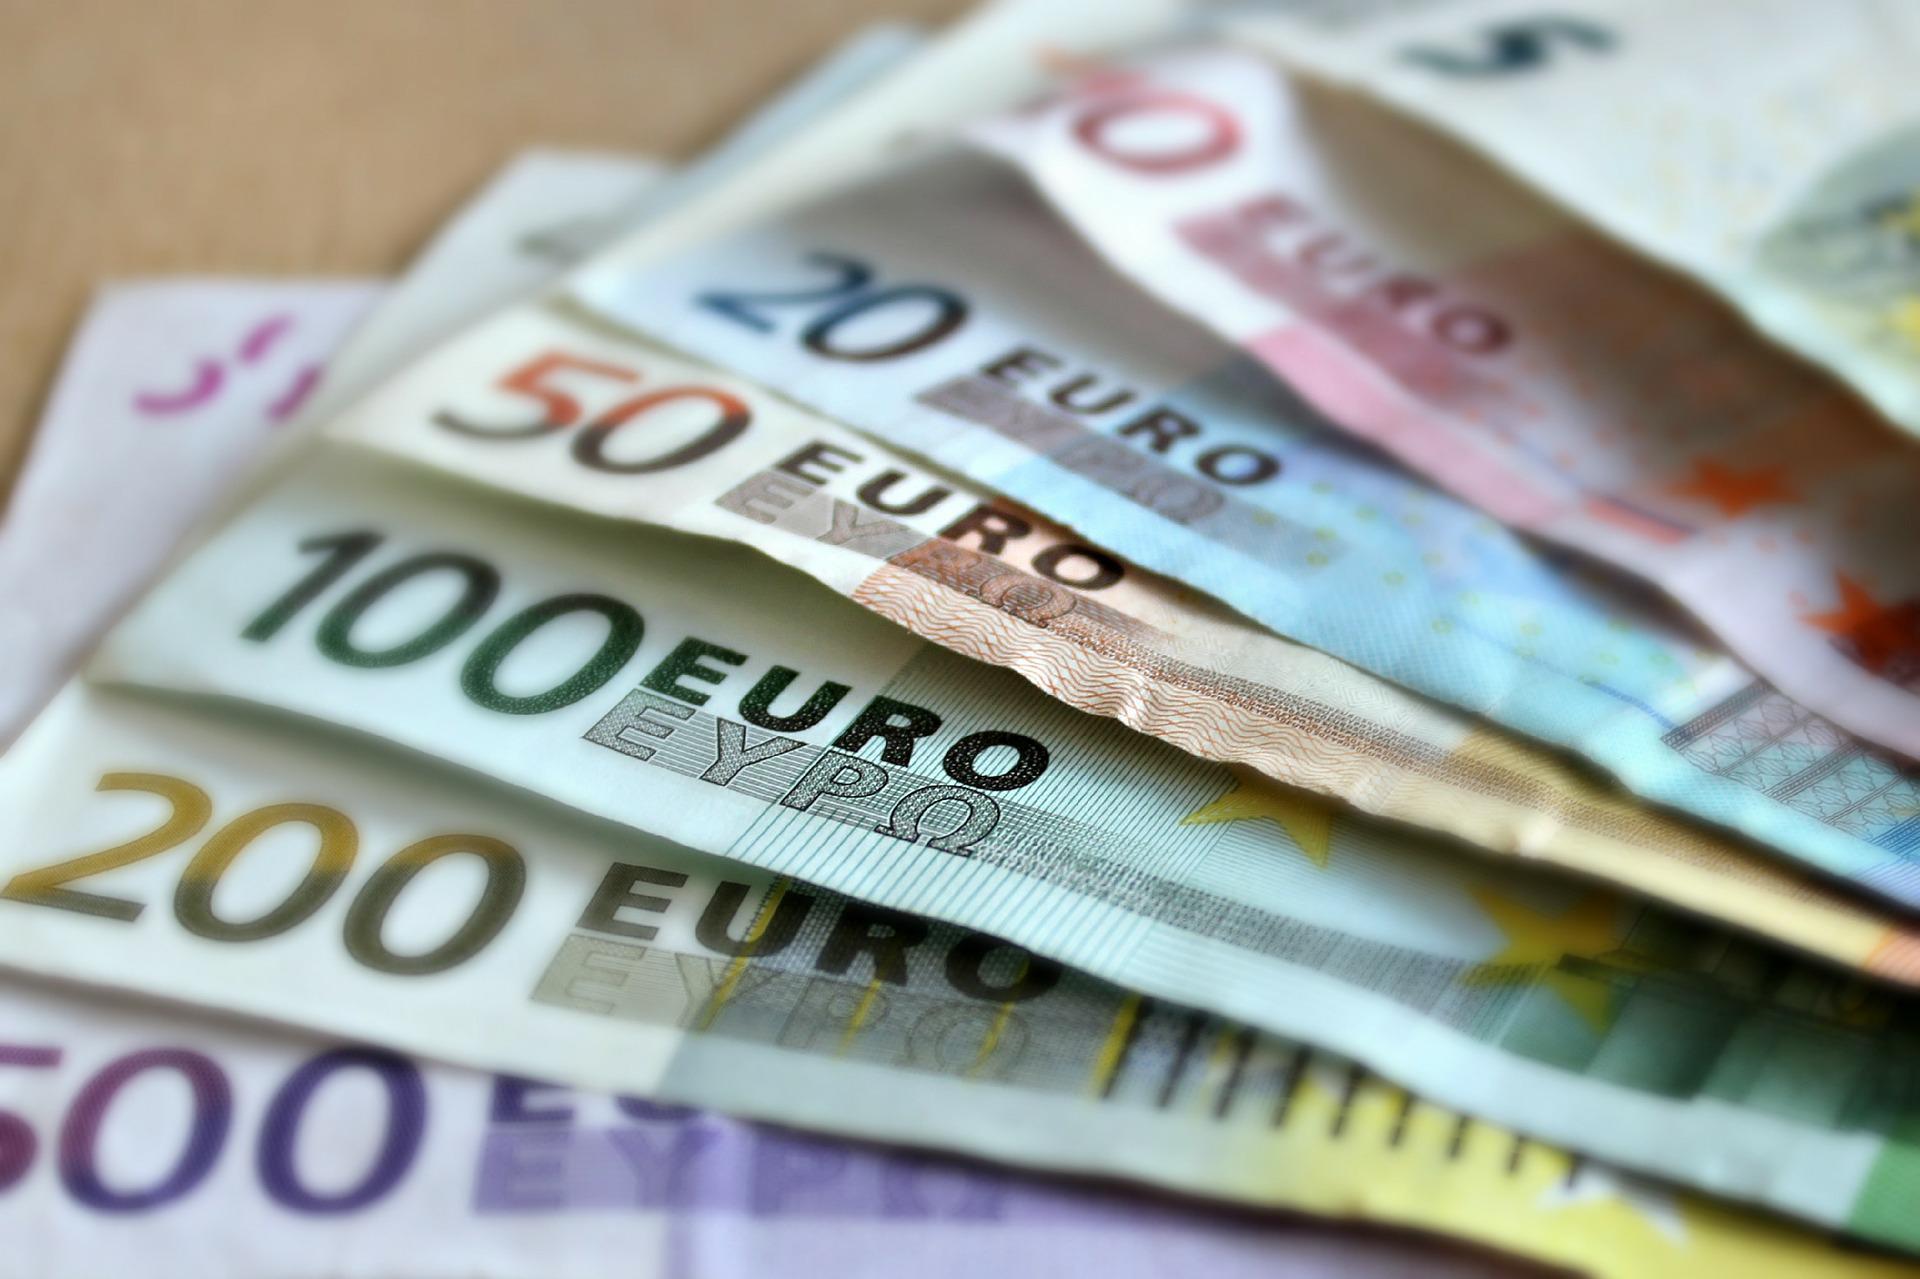 Euro, USD emerge as predominant currencies used in extra-EU trade last year